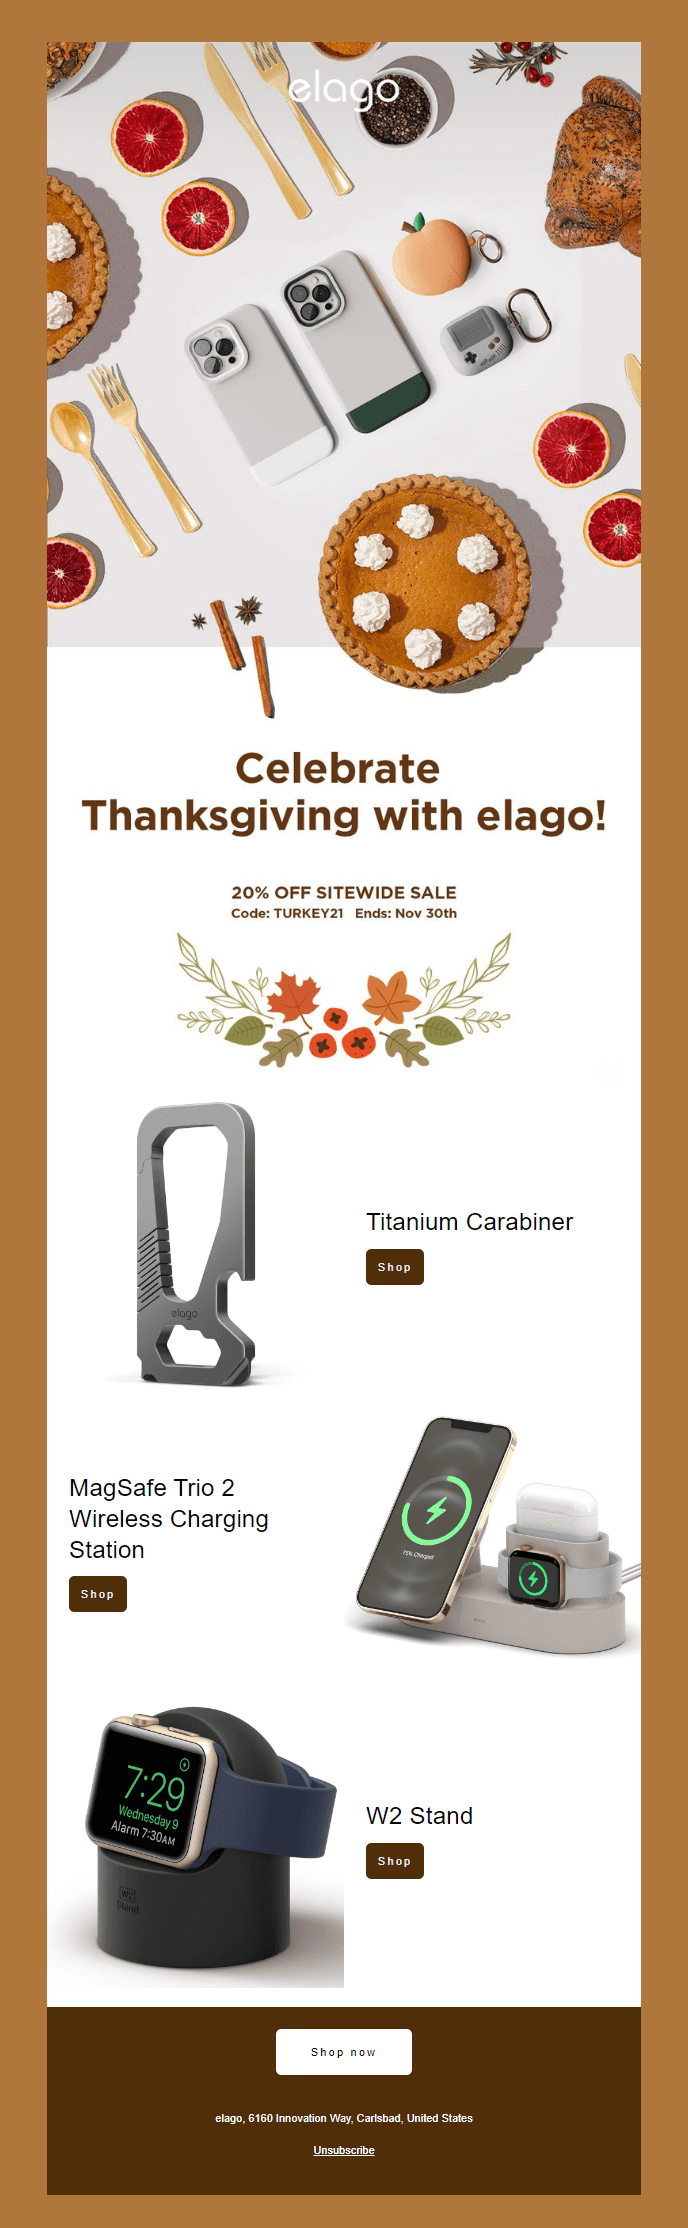 elago thanksgiving email campaign example